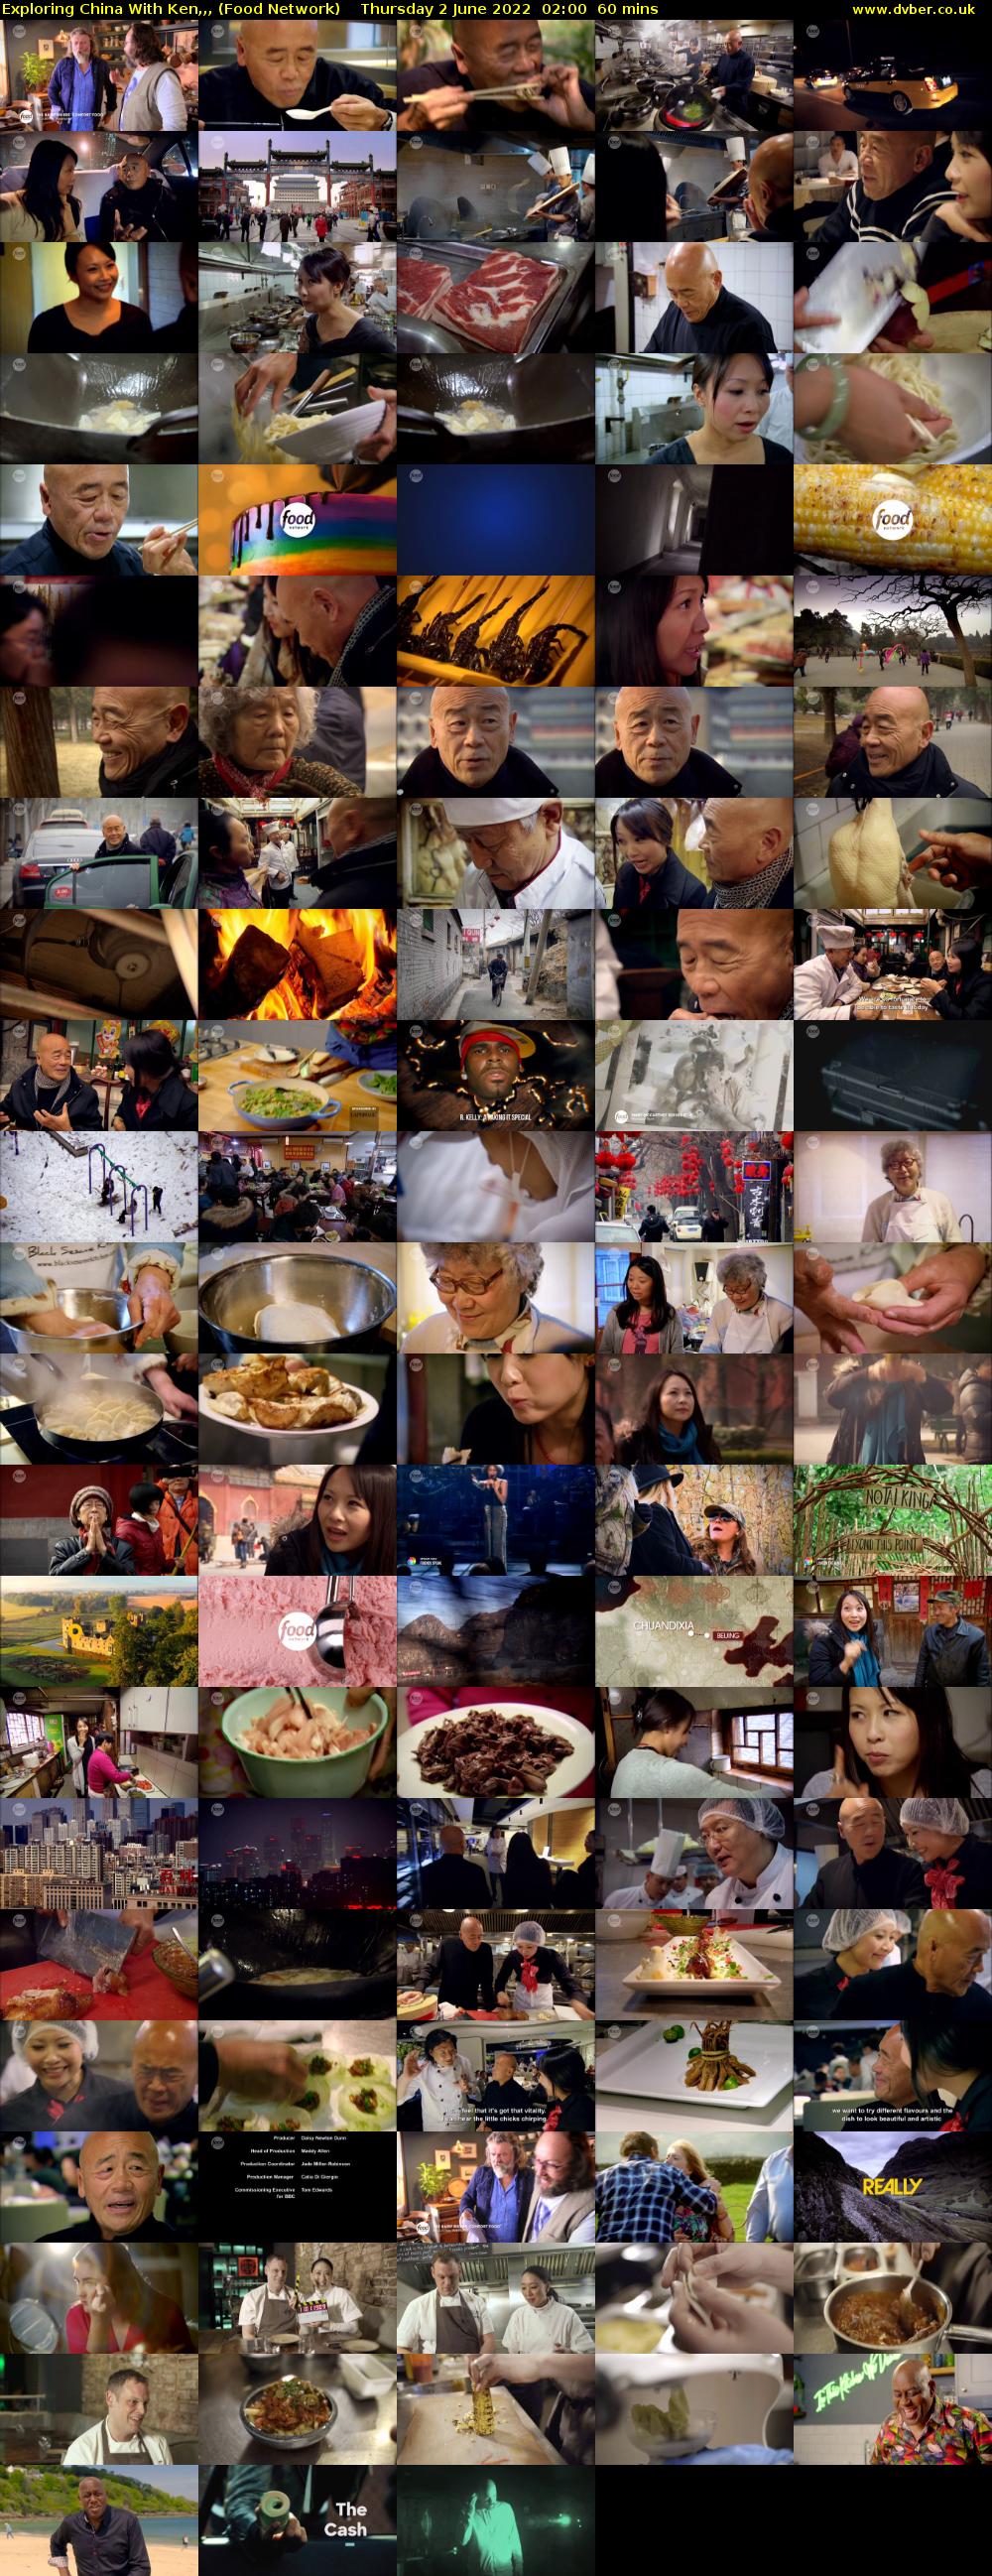 Exploring China With Ken,,, (Food Network) Thursday 2 June 2022 02:00 - 03:00